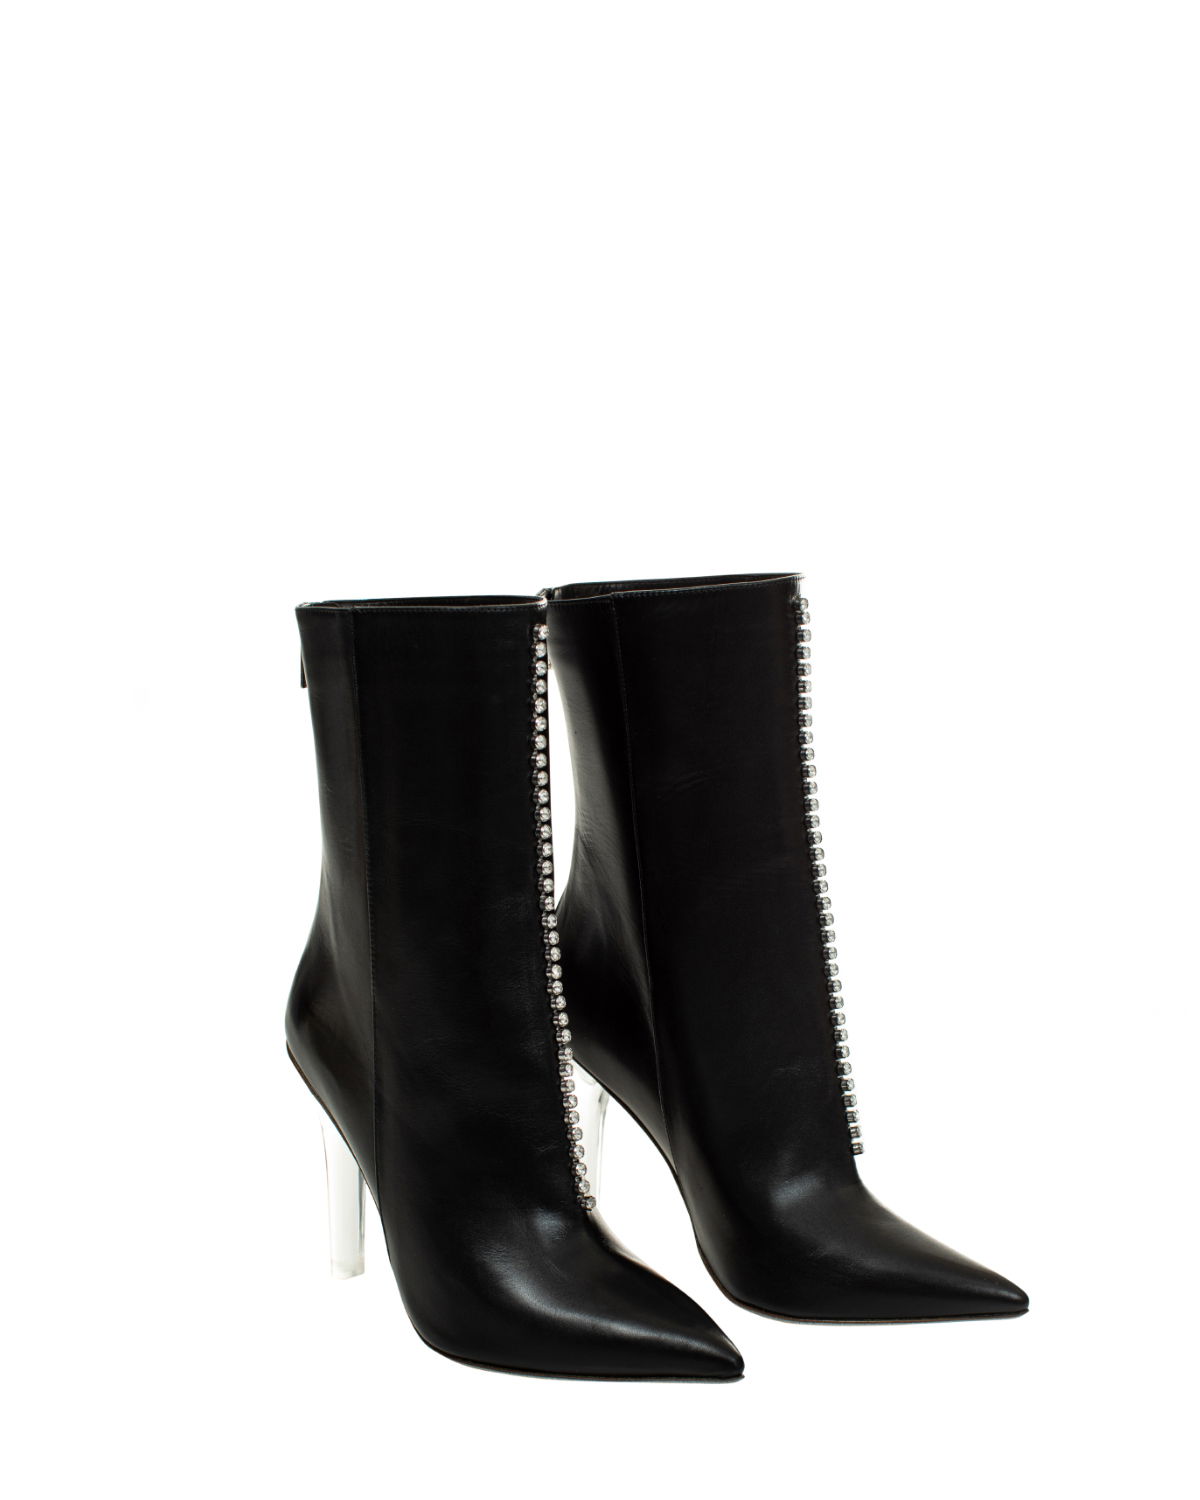 Black high boots | Sale | Genny